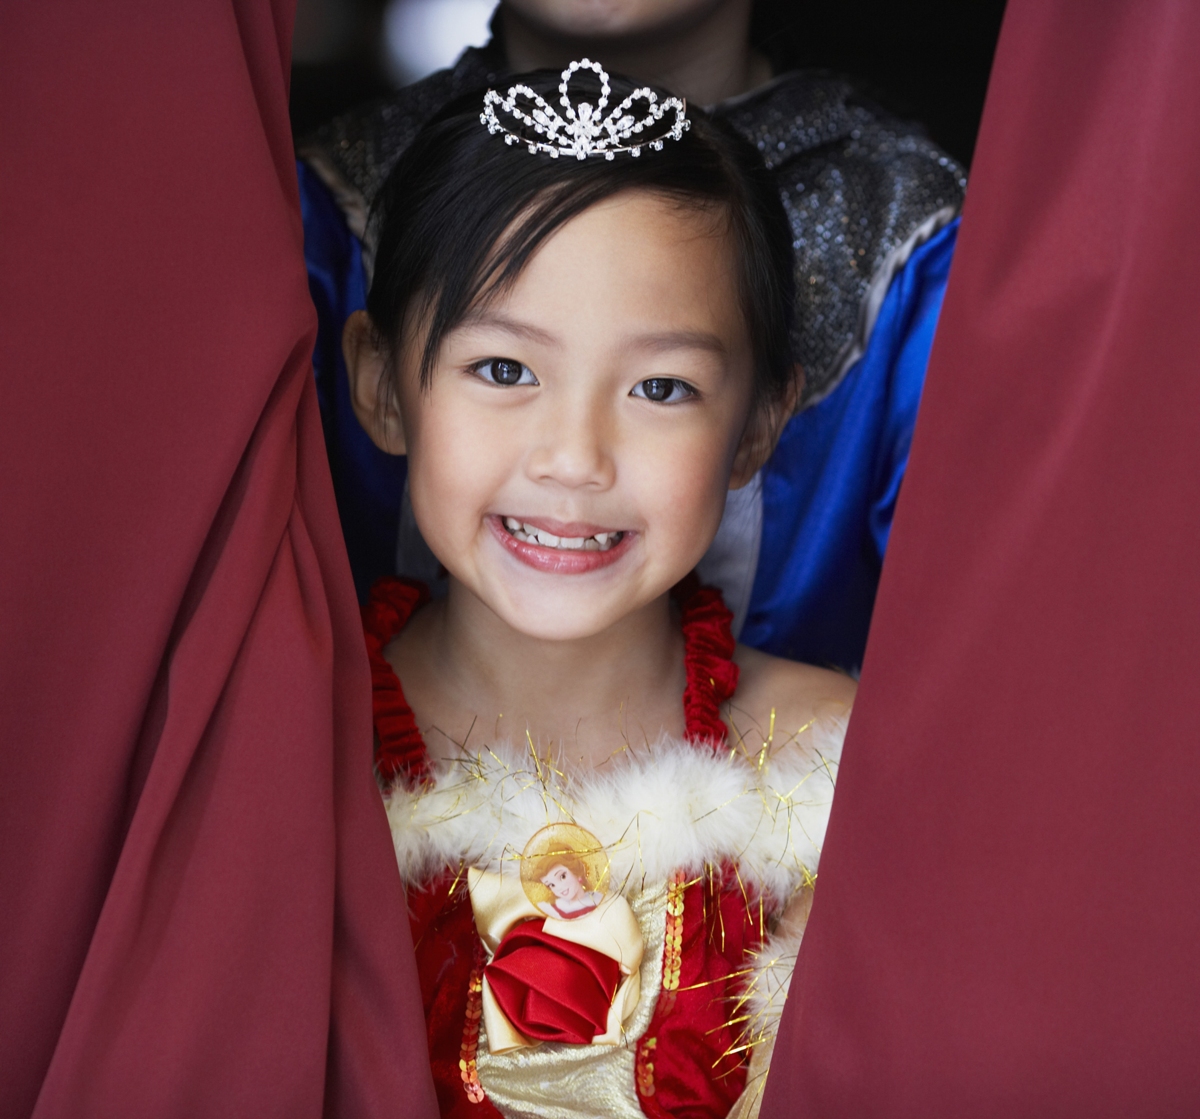 child beauty pageants pros and cons